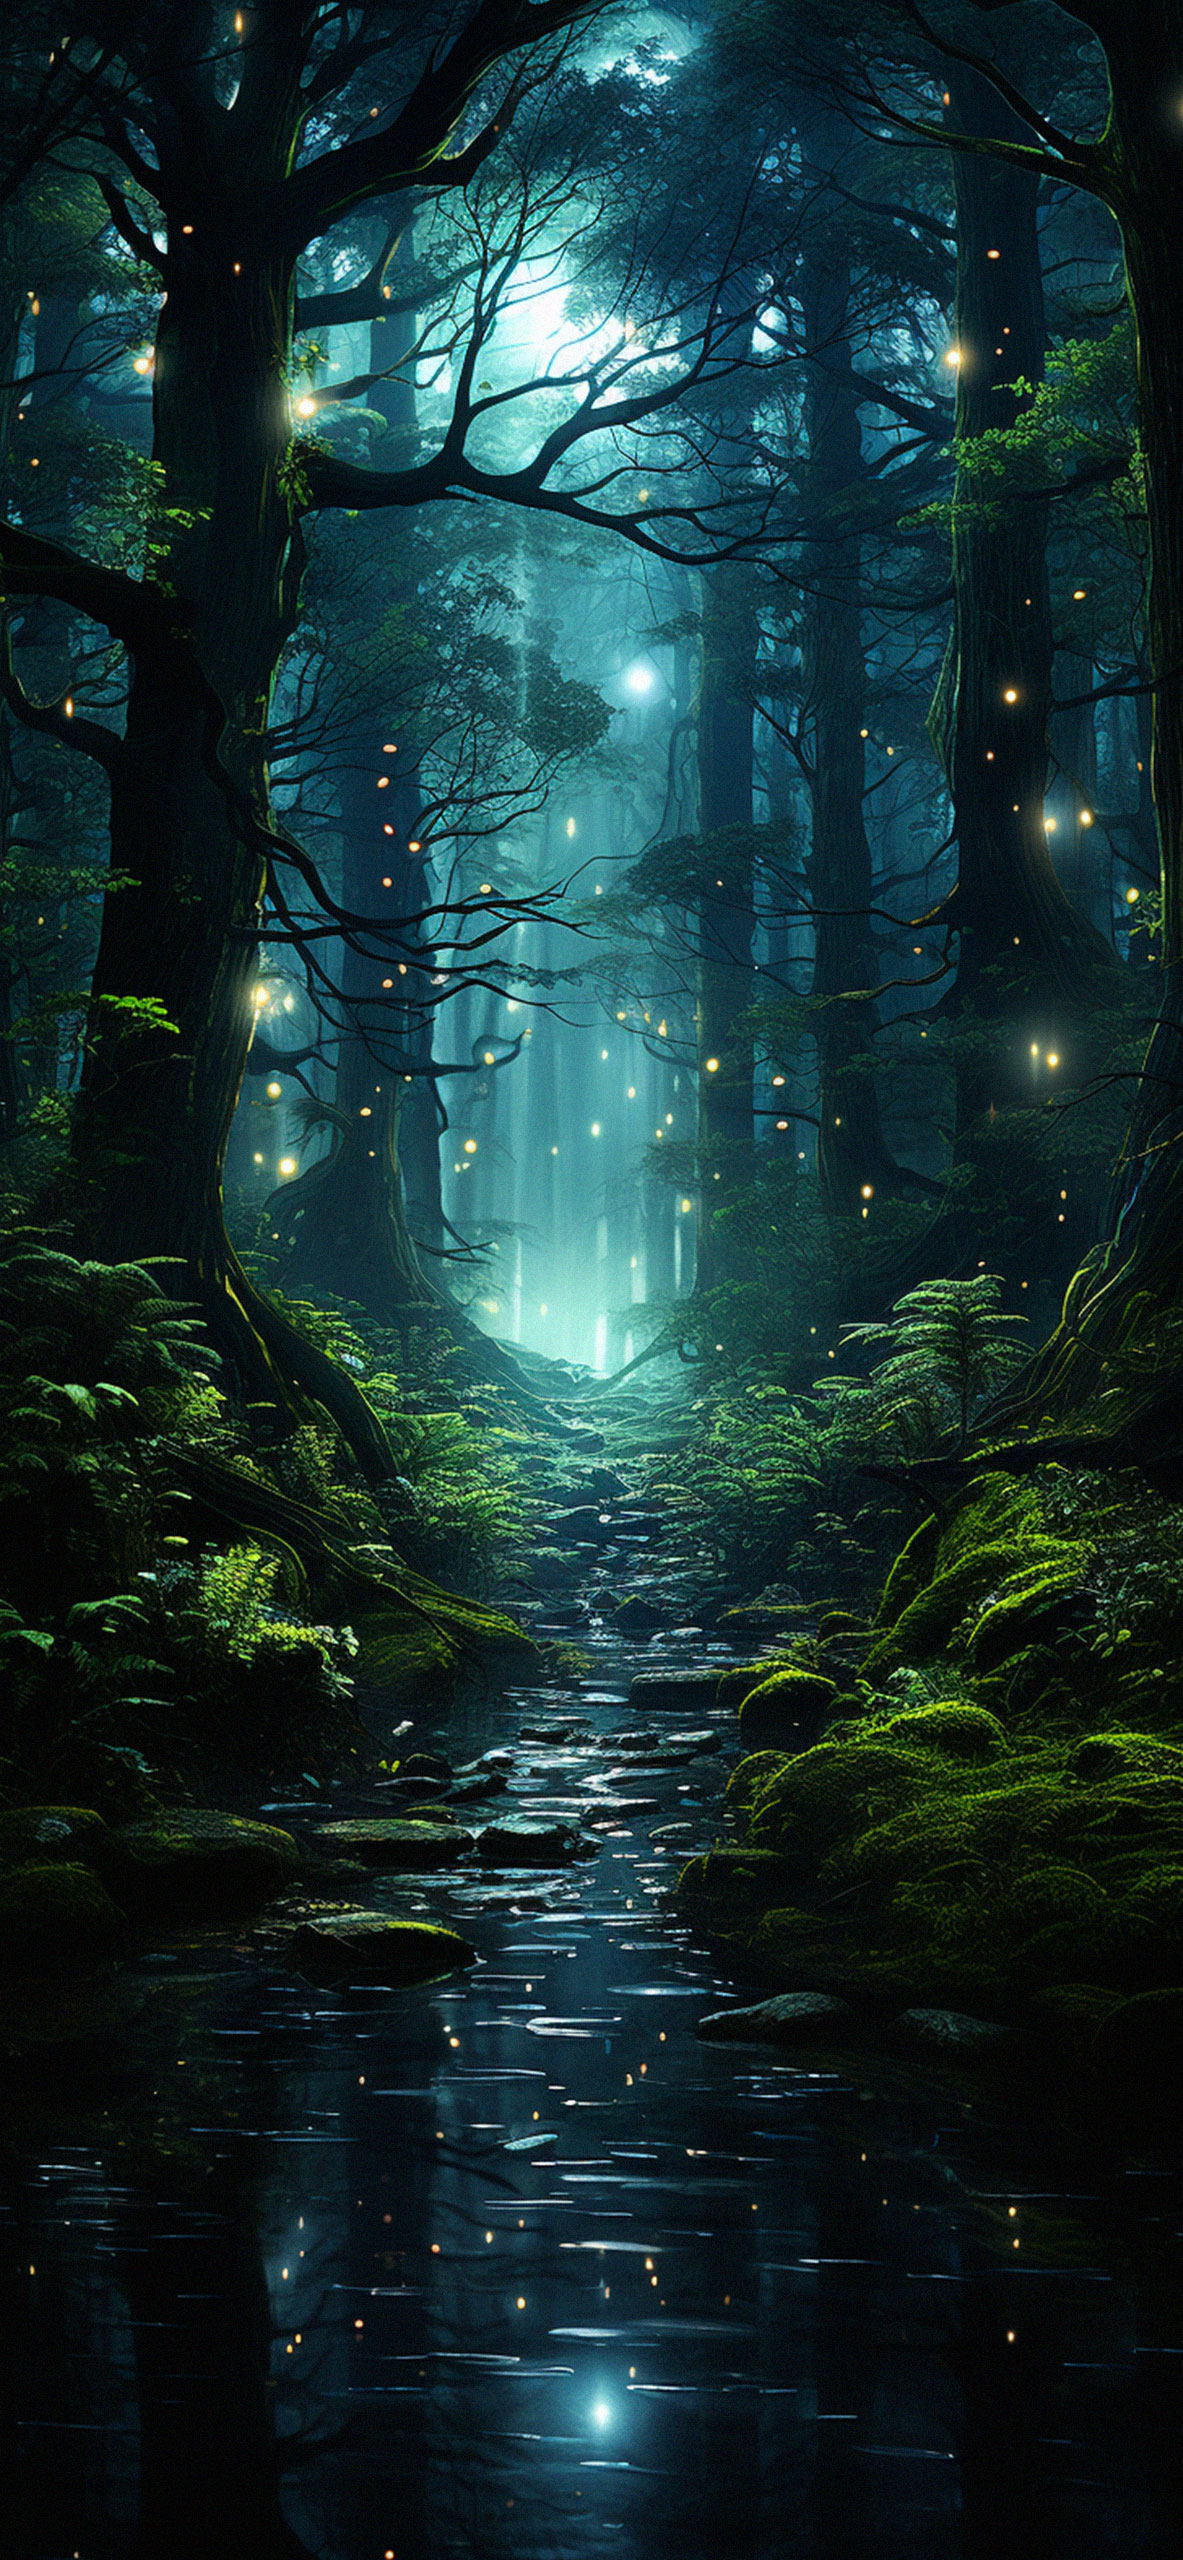 enchanted forest night